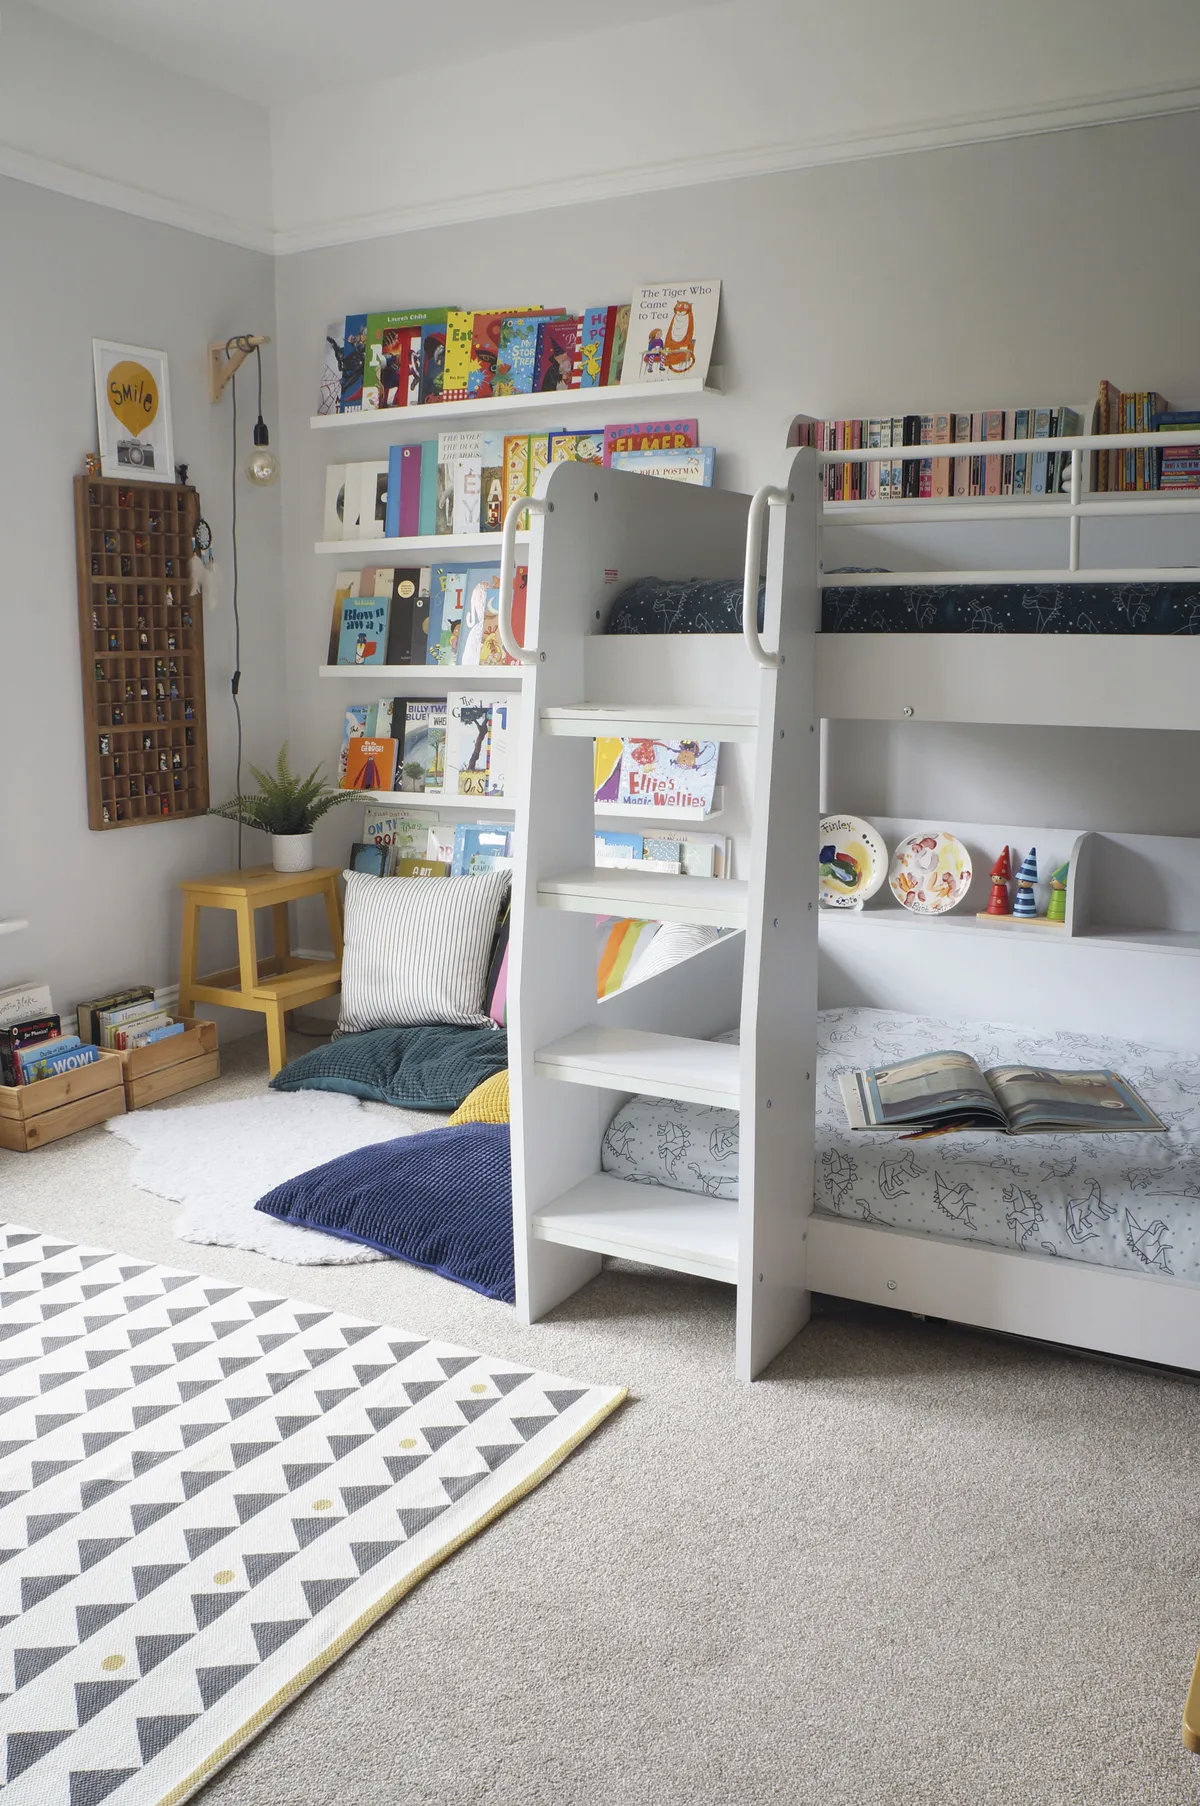 ‘The boys’ bedroom is an awkward shape, so we had to think carefully about furniture and layout,’ Jade says. ‘In the end, we decided on bunk beds to maximise floor space.’